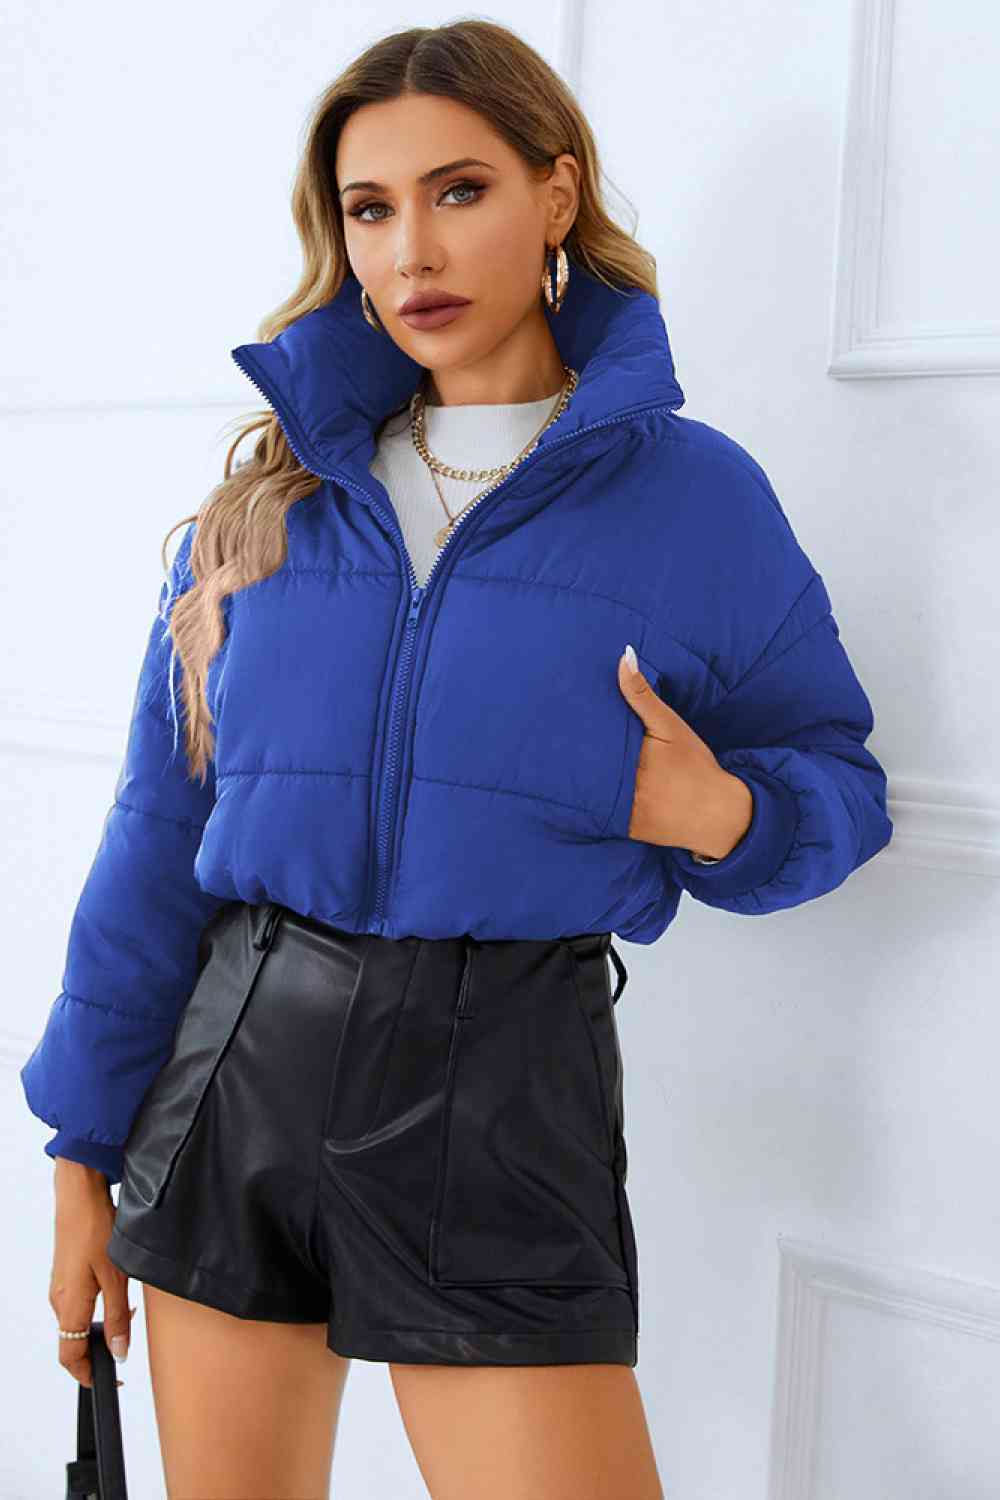 a warm and stylish winter coat in a rich, deep shade of navy blue. The coat features a faux fur-lined hood, zippered front, and ample pockets for added convenience. Perfect for staying cozy and fashionable during the cold winter months.